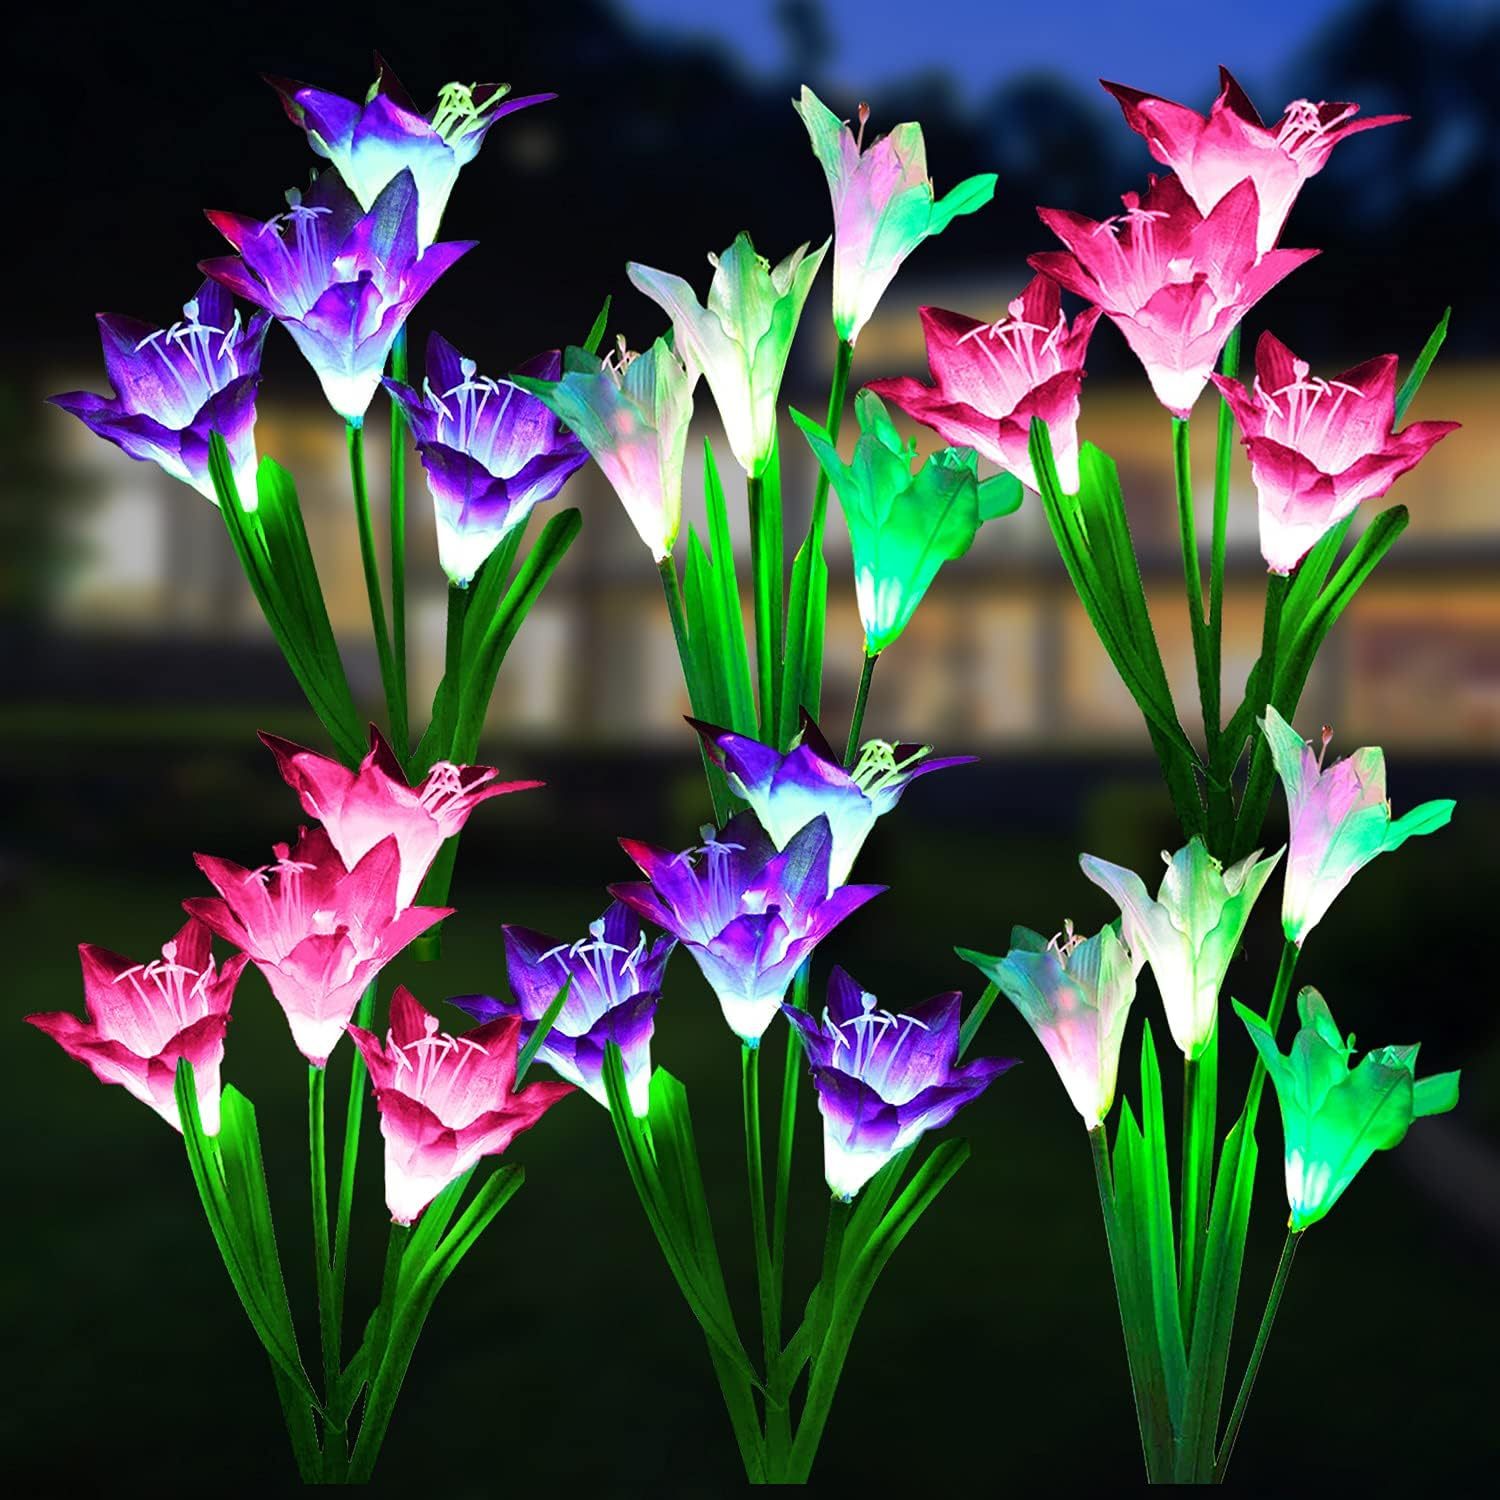 

Solar Lights Outdoor Garden Decorative Flowers 8 Pack, Waterproof With 24 Lily Flowers, Multi-color Changing Led Solar Powered Landscape Lights For Yard Garden Patio